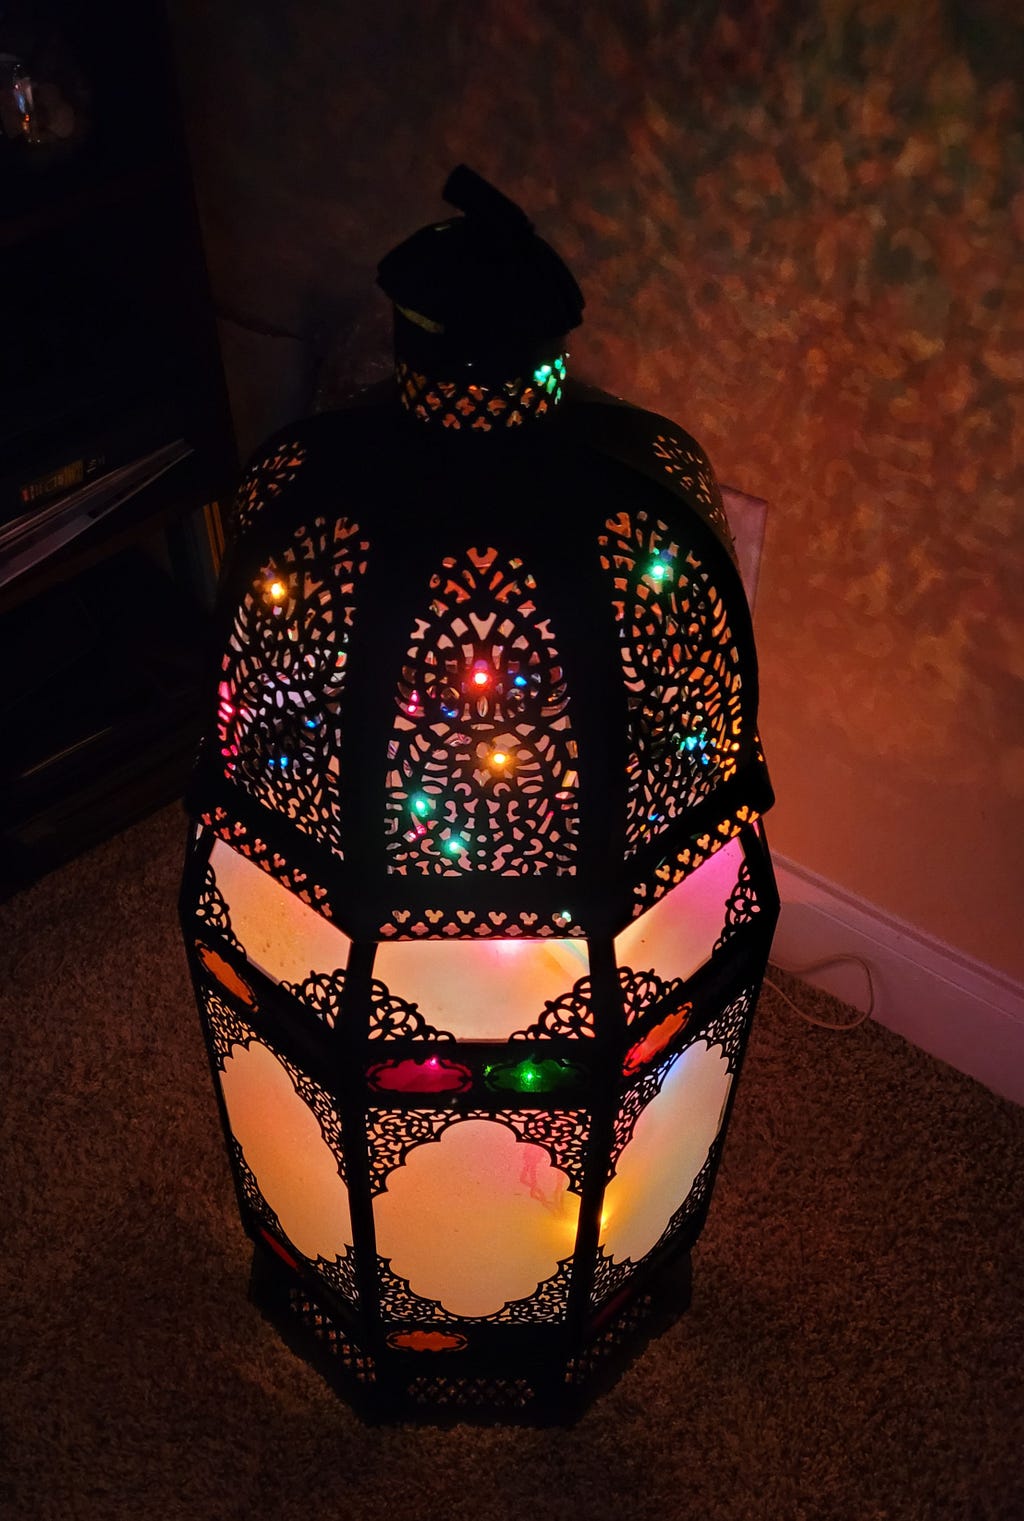 My traditional Ramadan lantern, which is made of glass panes framed in metal arabesque motifs, is lit from within with Christmas string lights.